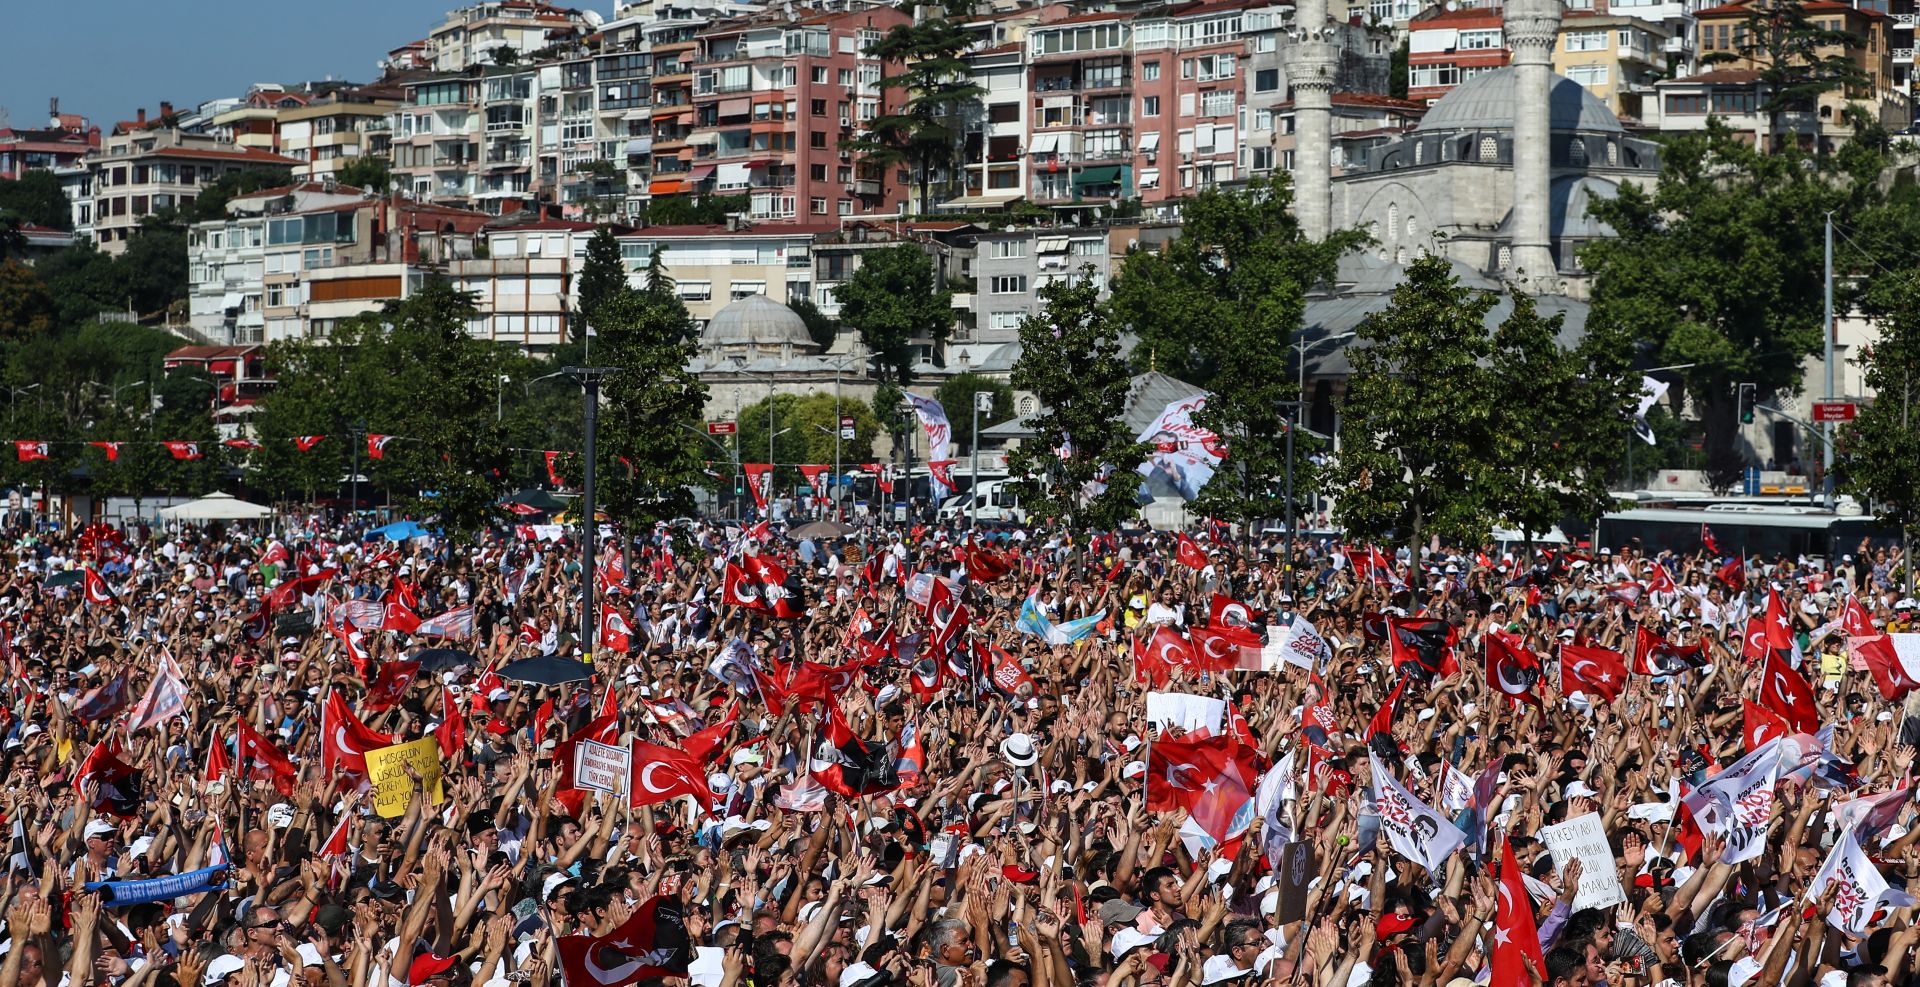 epa07666542 Supporters of Republican People's Party 'CHP' candidate for Istanbul mayor Ekrem Imamoglu during his repeated election campaign rally in Istanbul, Turkey, 22 June 2019. According to media reports, the Turkish Electoral Commission has ordered a repeat of the mayoral election in Istanbul on 23 June, after Turkish President Recep Tayyip Erdogan's AK Party had alleged there was 'corruption' behind his party losing.  EPA/SEDAT SUNA